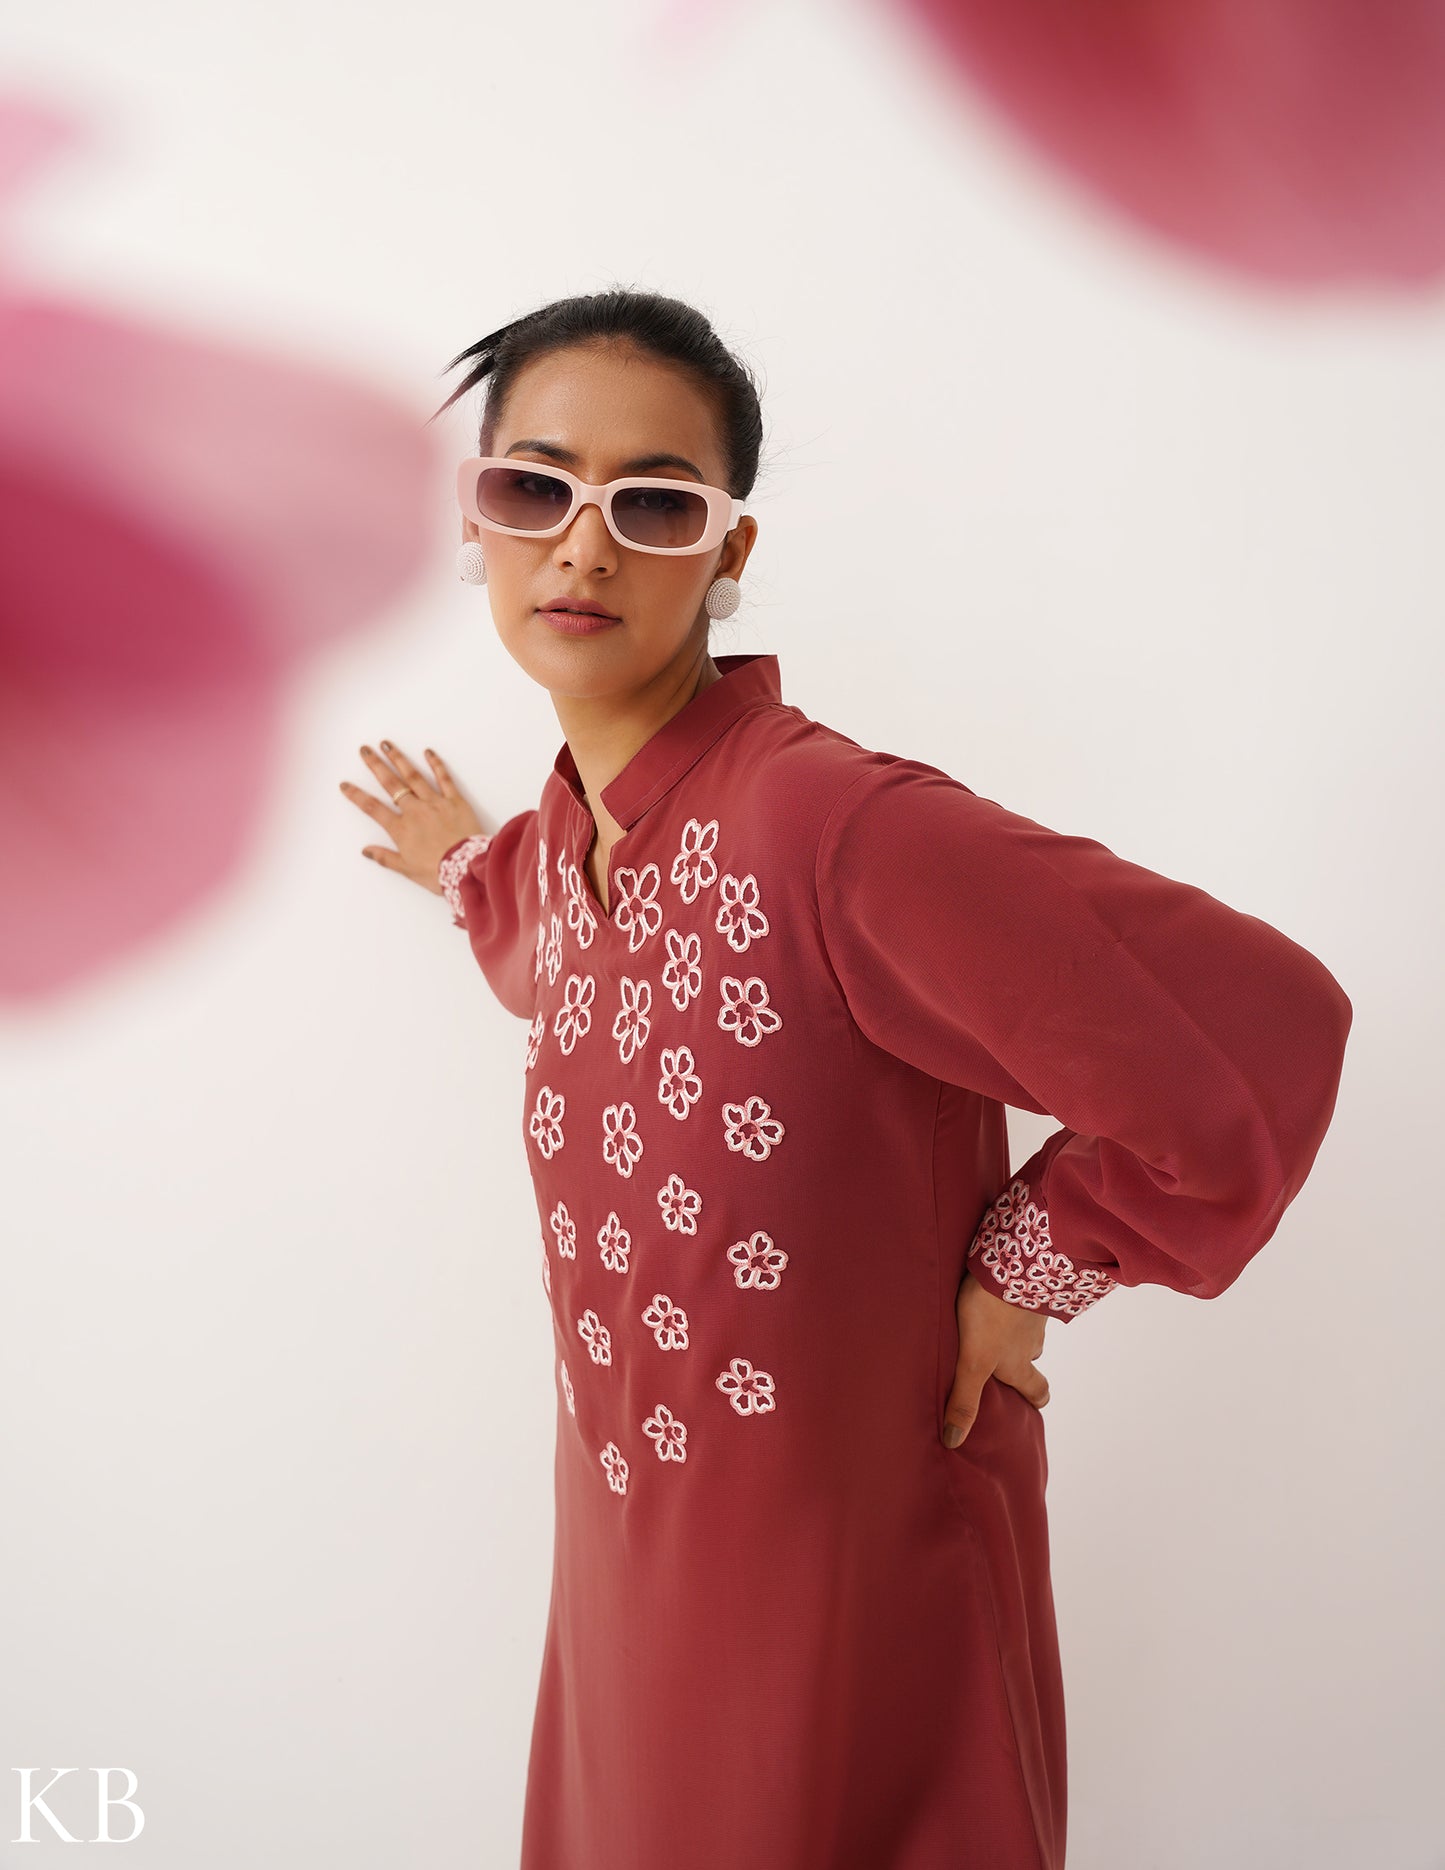 Berry Artisanal Embroidered Blush Balloon Sleeves Georgette Tunic - Kashmir Box